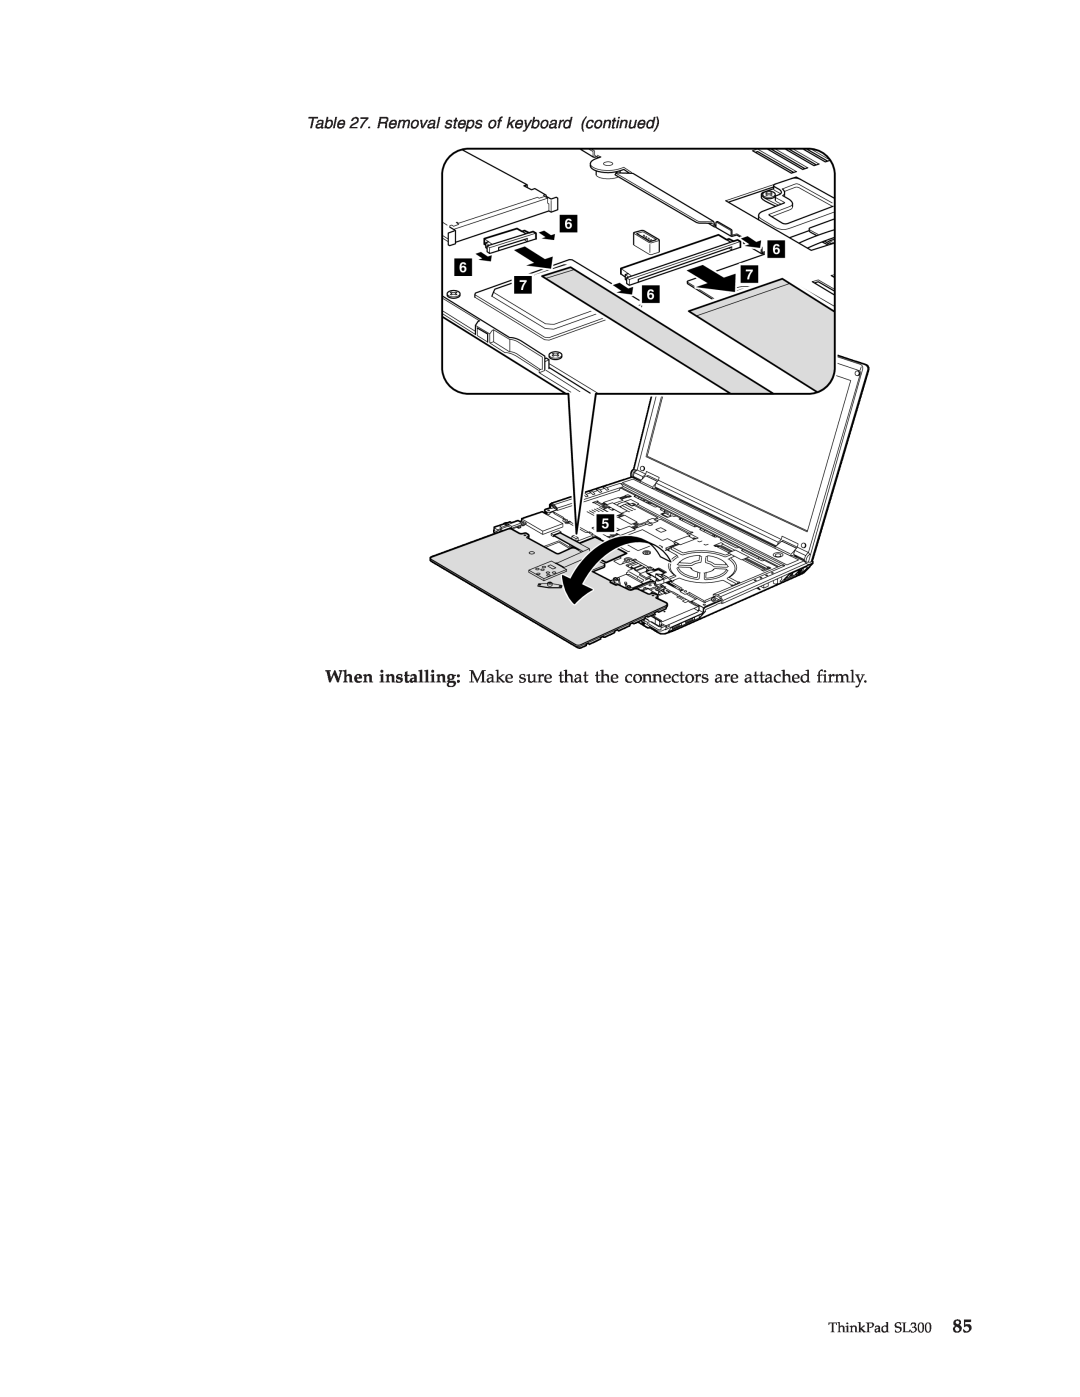 Lenovo SL300 manual When installing Make sure that the connectors are attached firmly, Removal steps of keyboard continued 